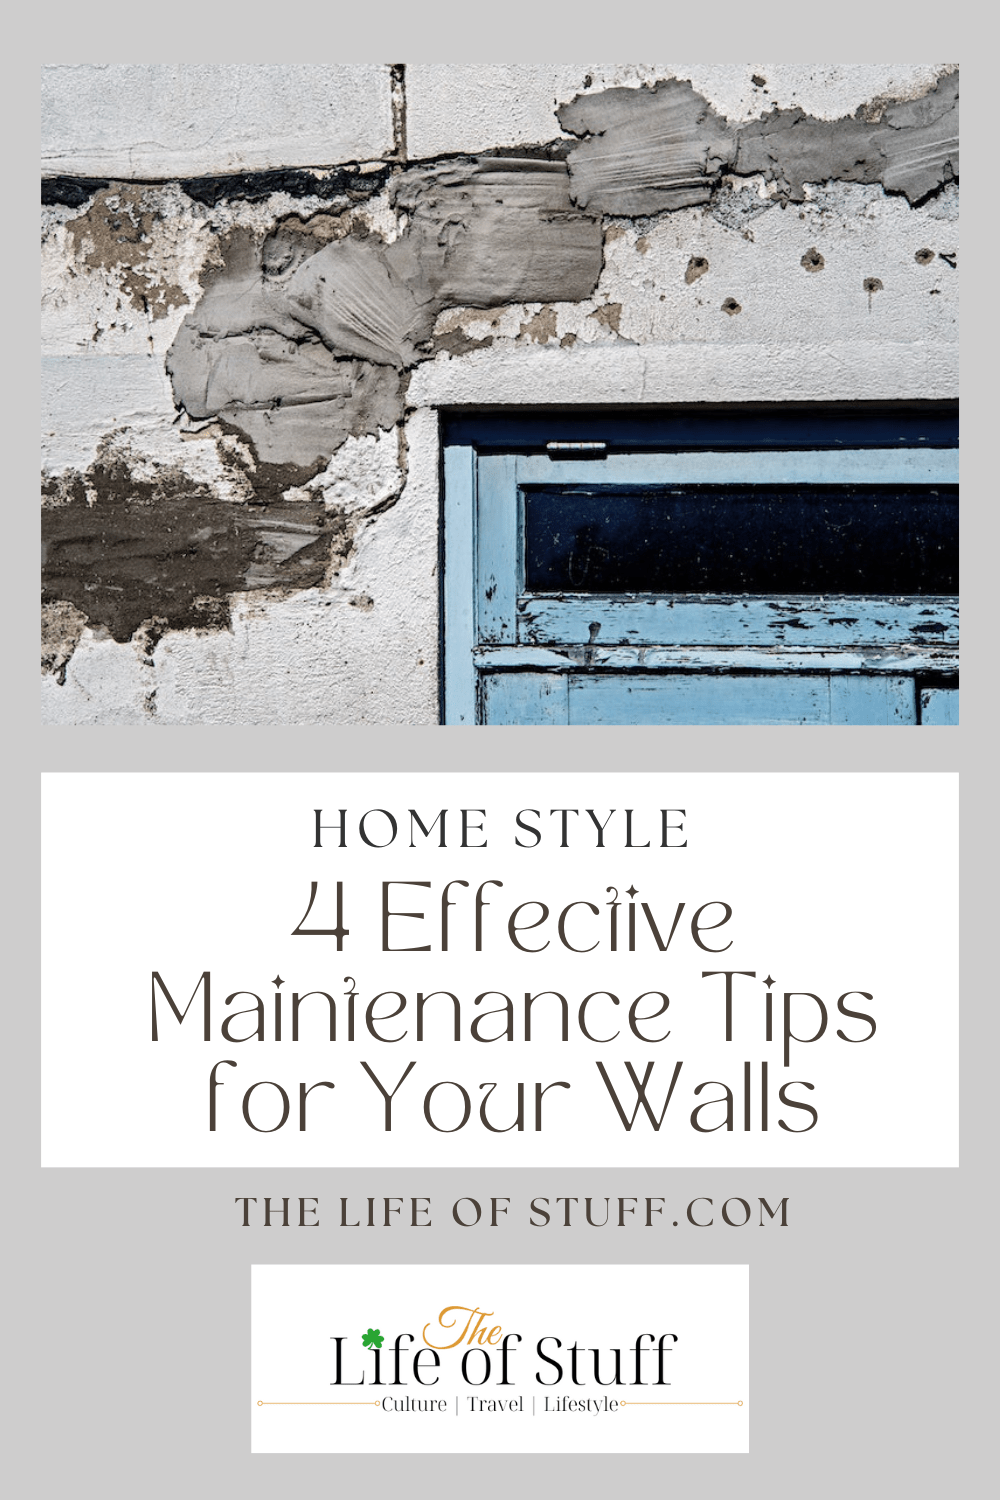 Home Style - 4 Effective Maintenance Tips for Your Walls - The Life of Stuff